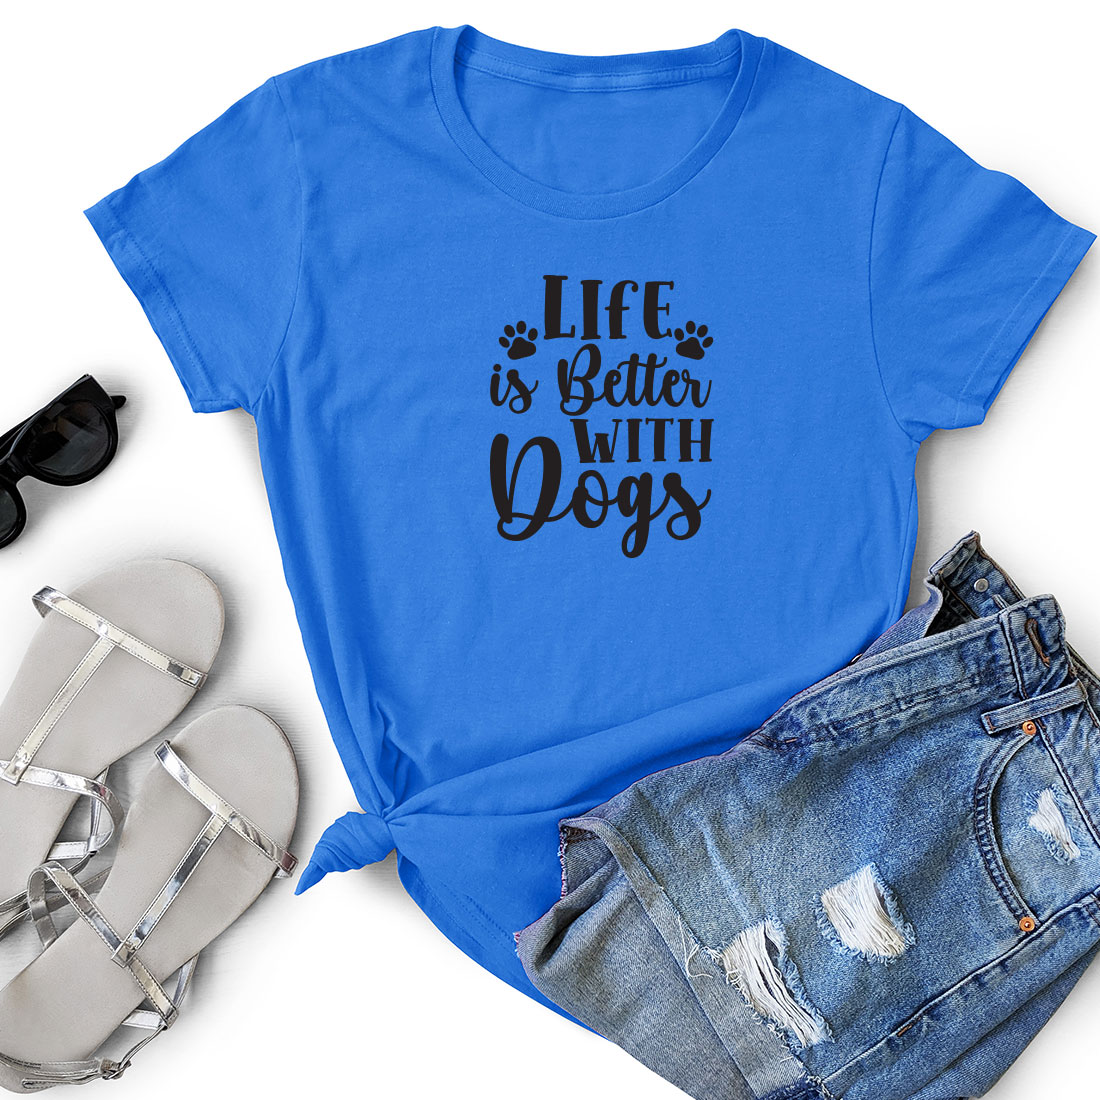 Blue shirt that says life is better with dogs.